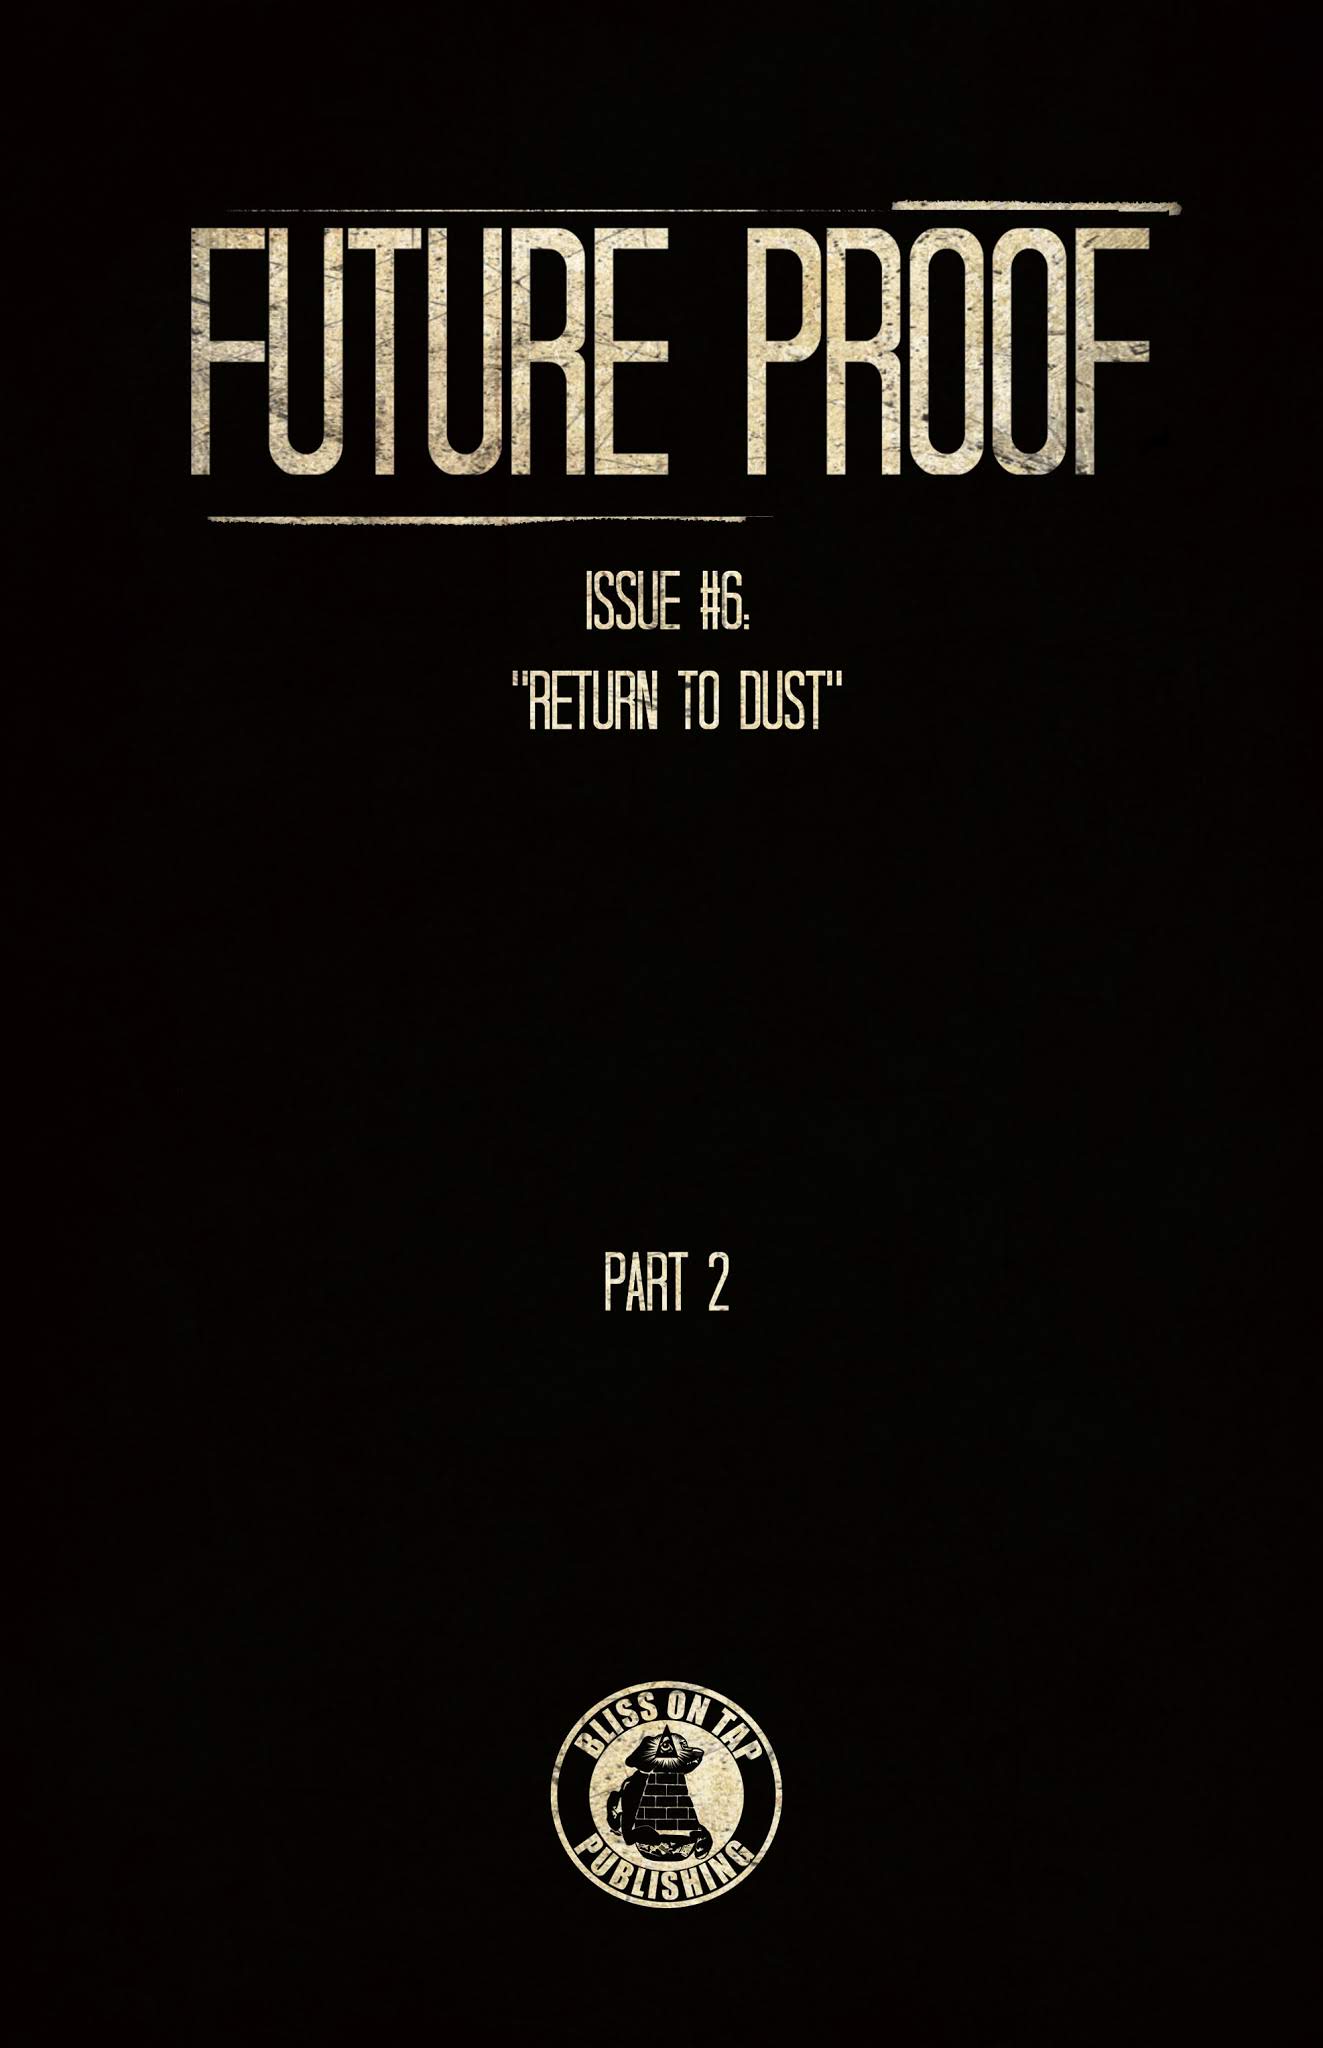 Read online Future Proof comic -  Issue #6 - 2